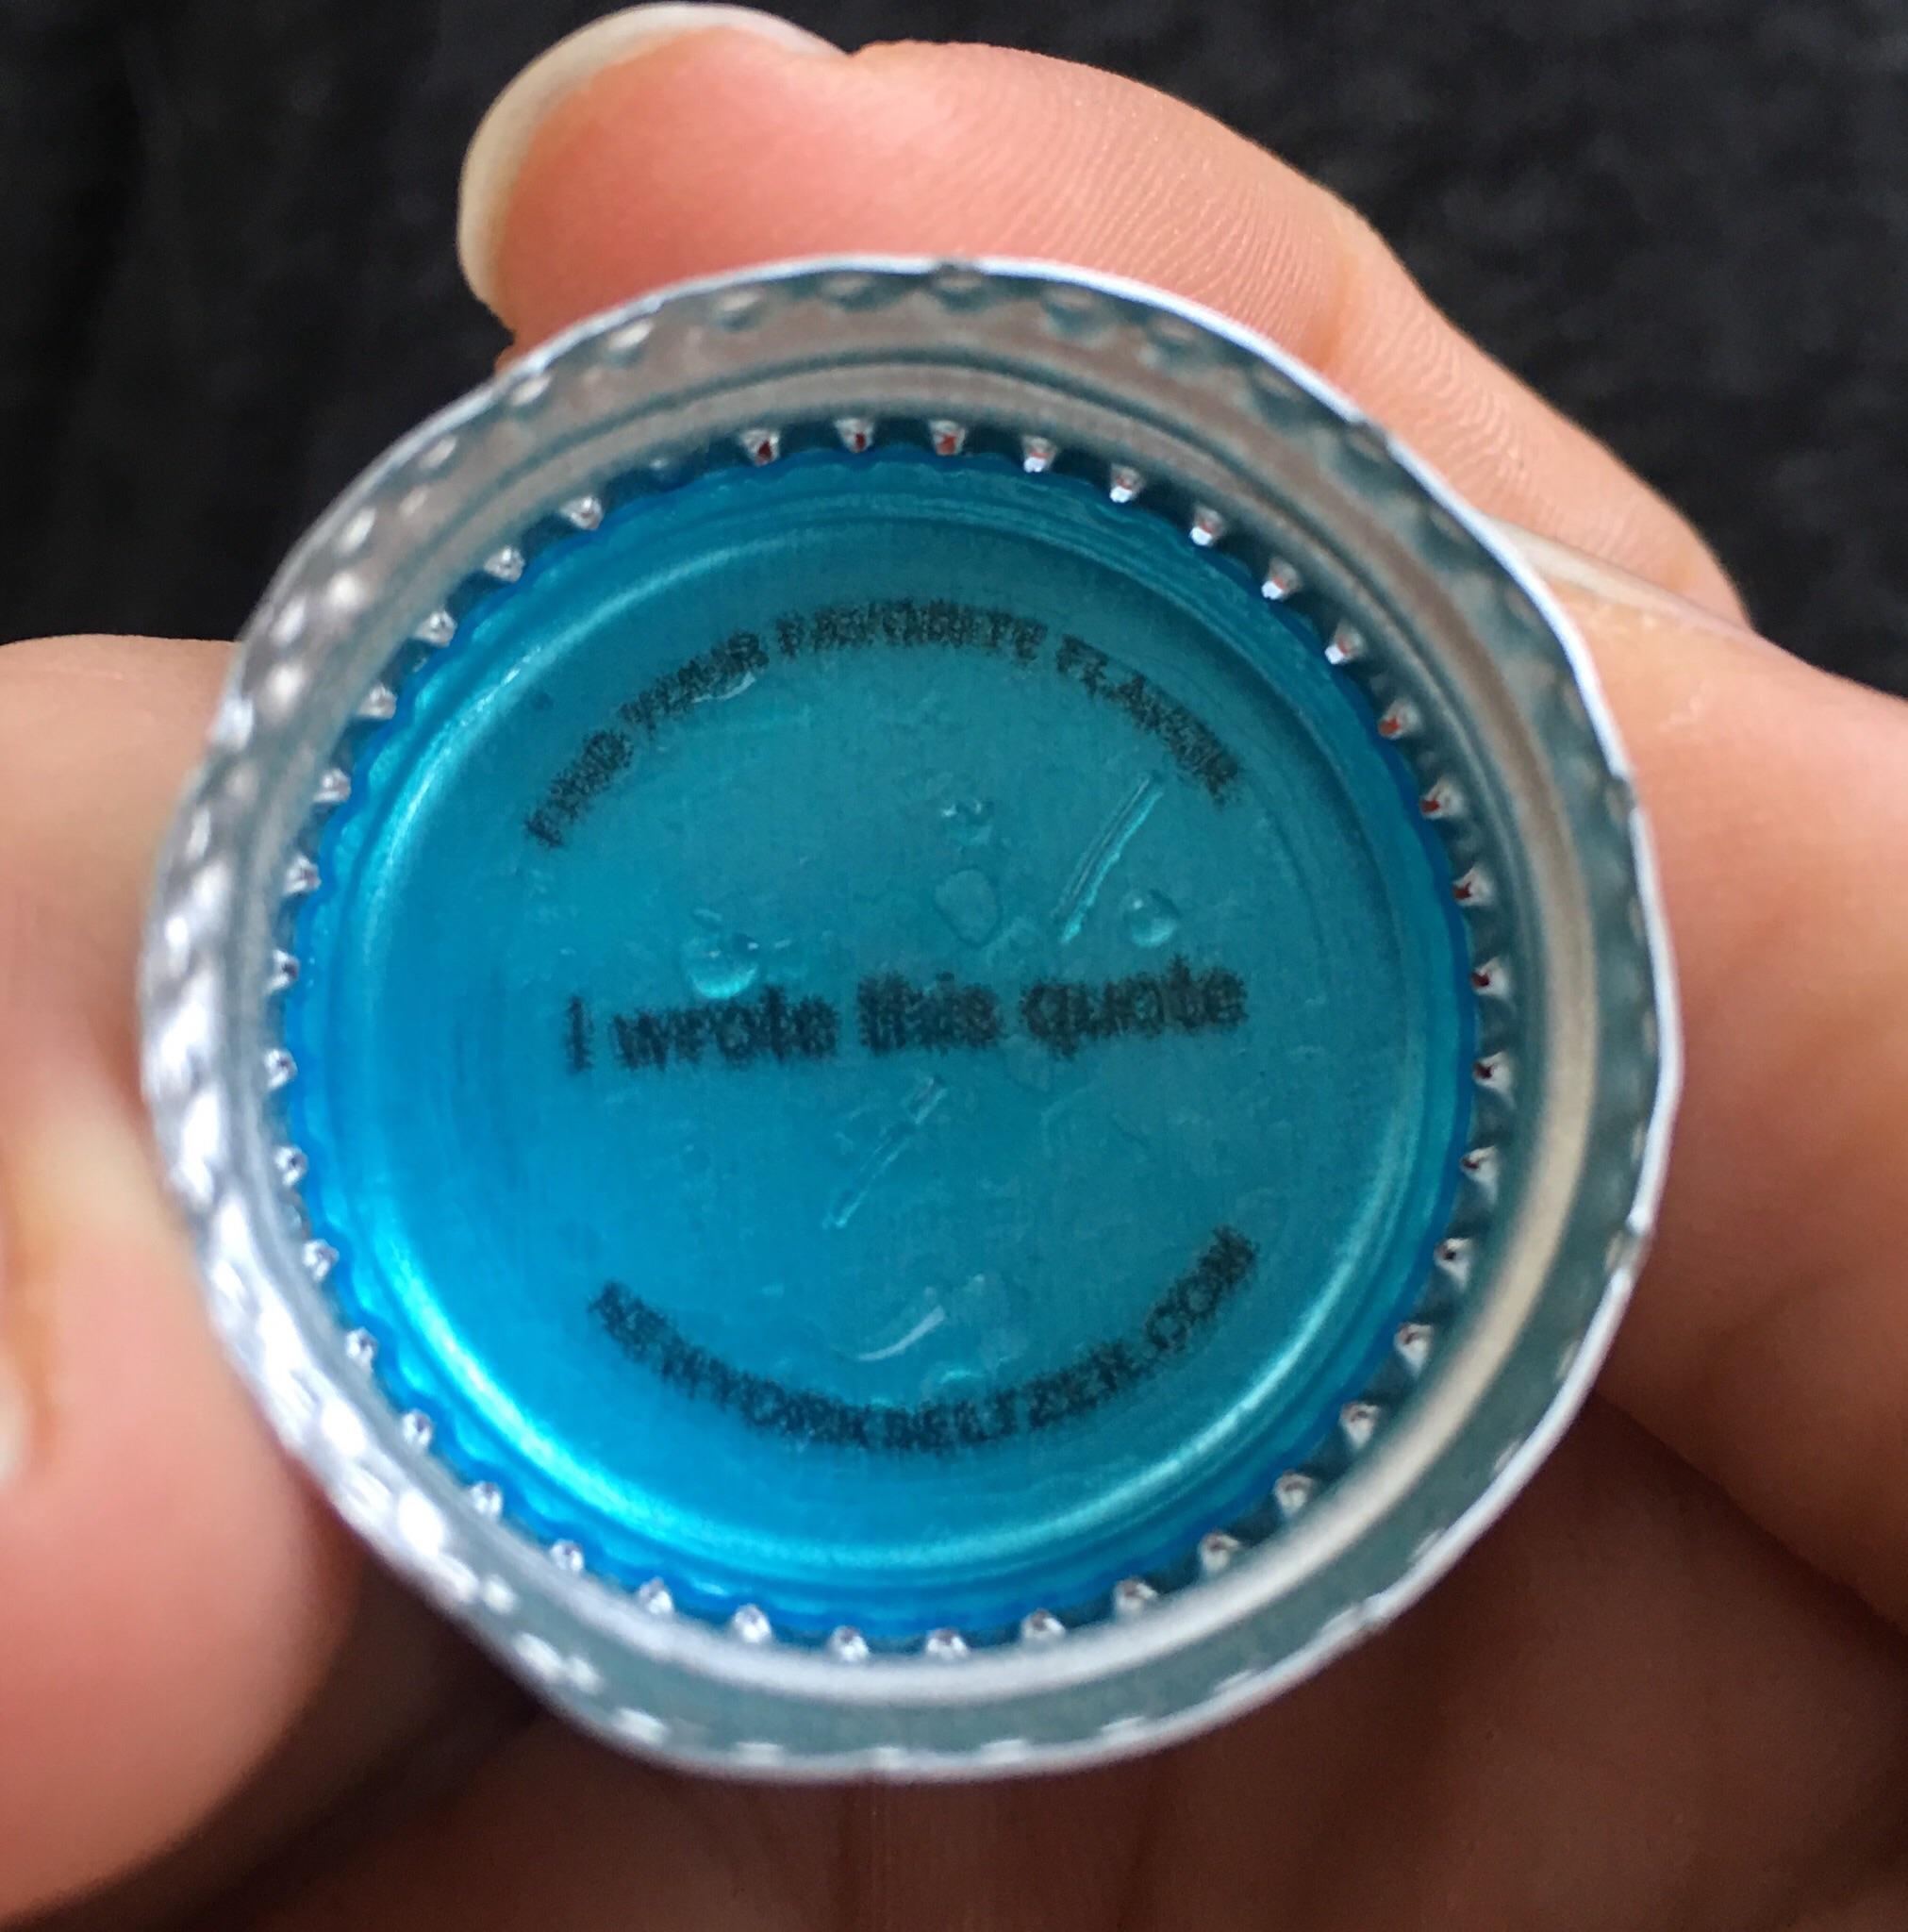 Got this in a New York seltzer cap : NotMyJob